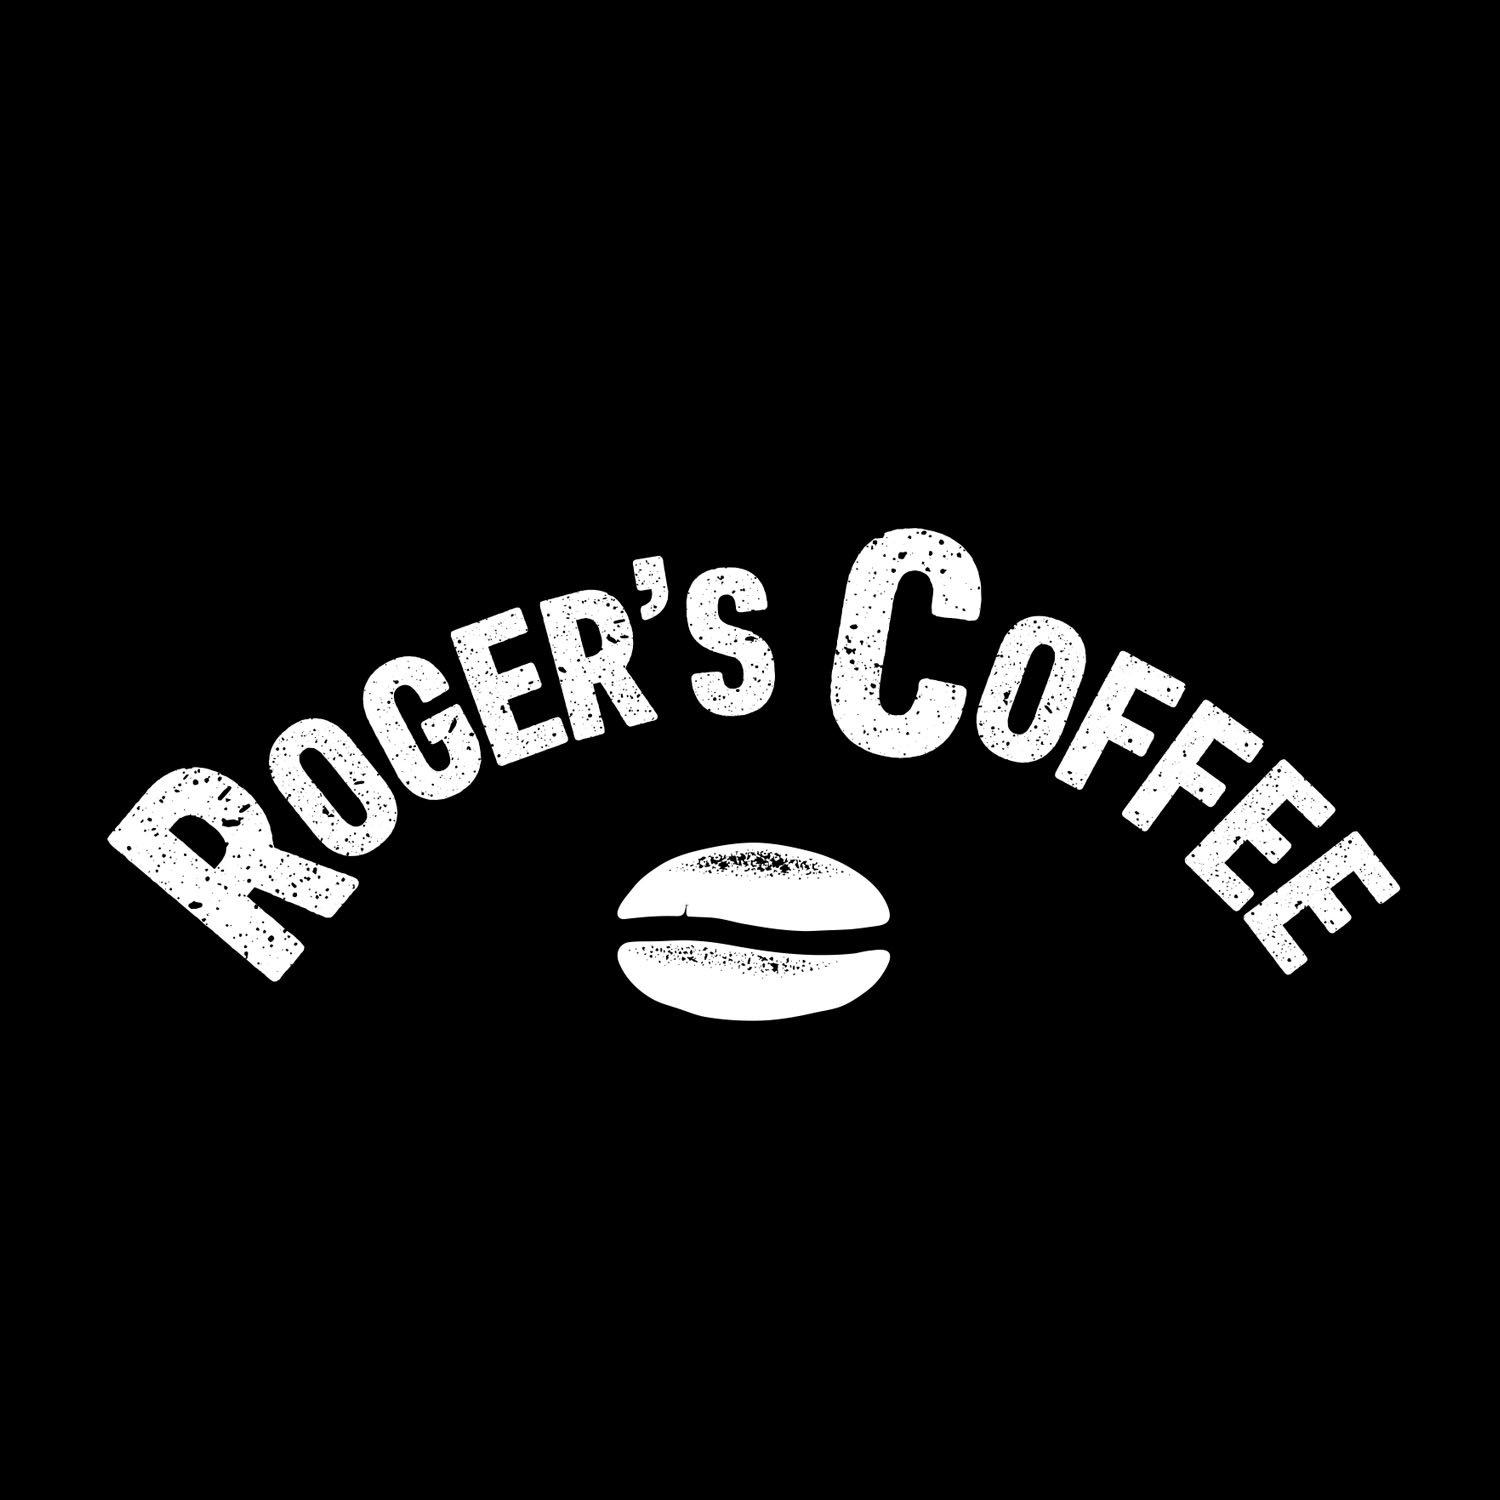 Logo, Roger's Coffee, made by Therwiz Design